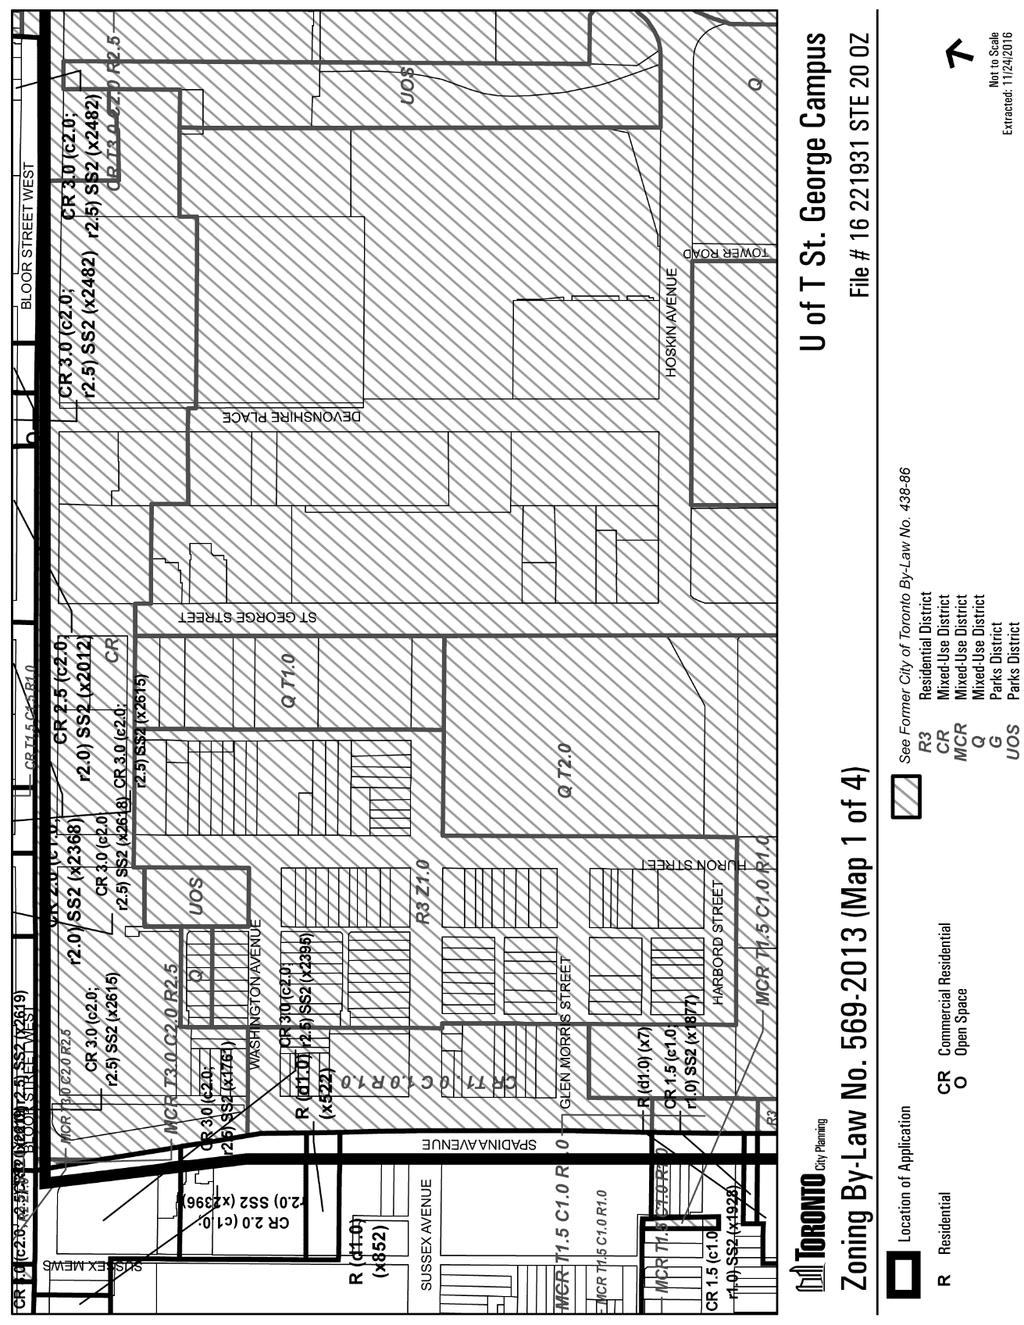 Attachment 3: Zoning Staff report for